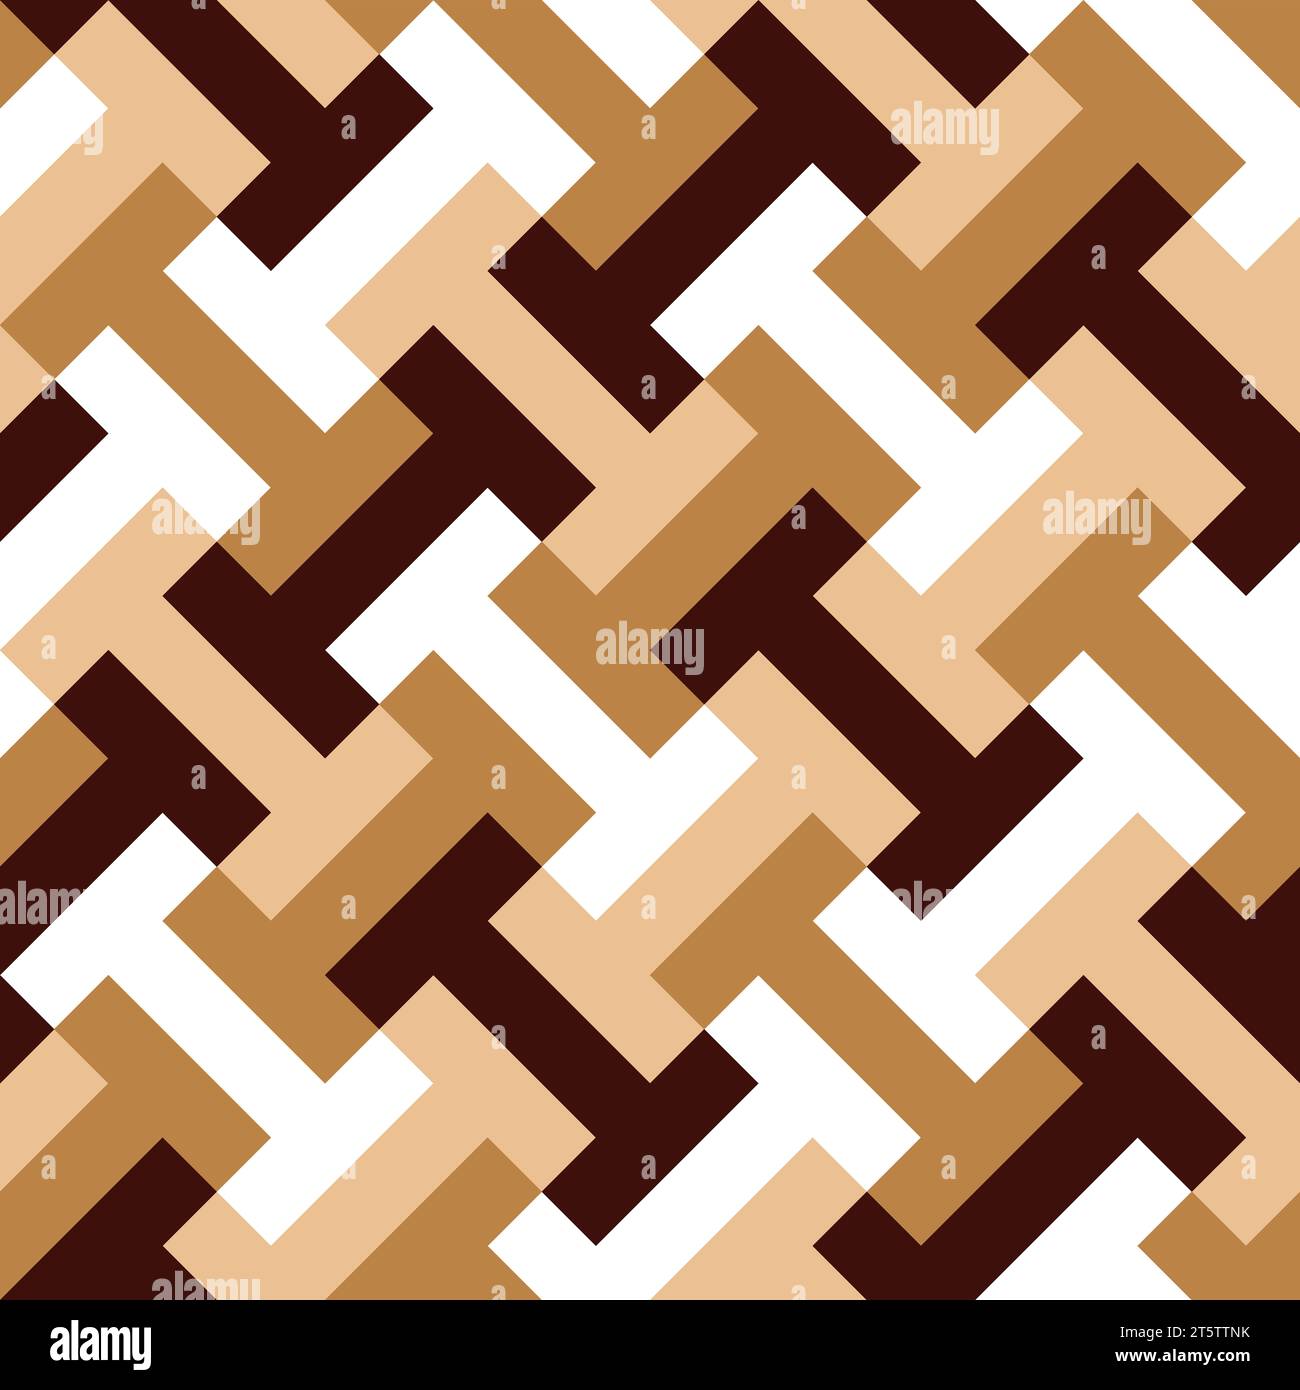 Seamless pattern with geometric motifs in 4 colors Stock Photo